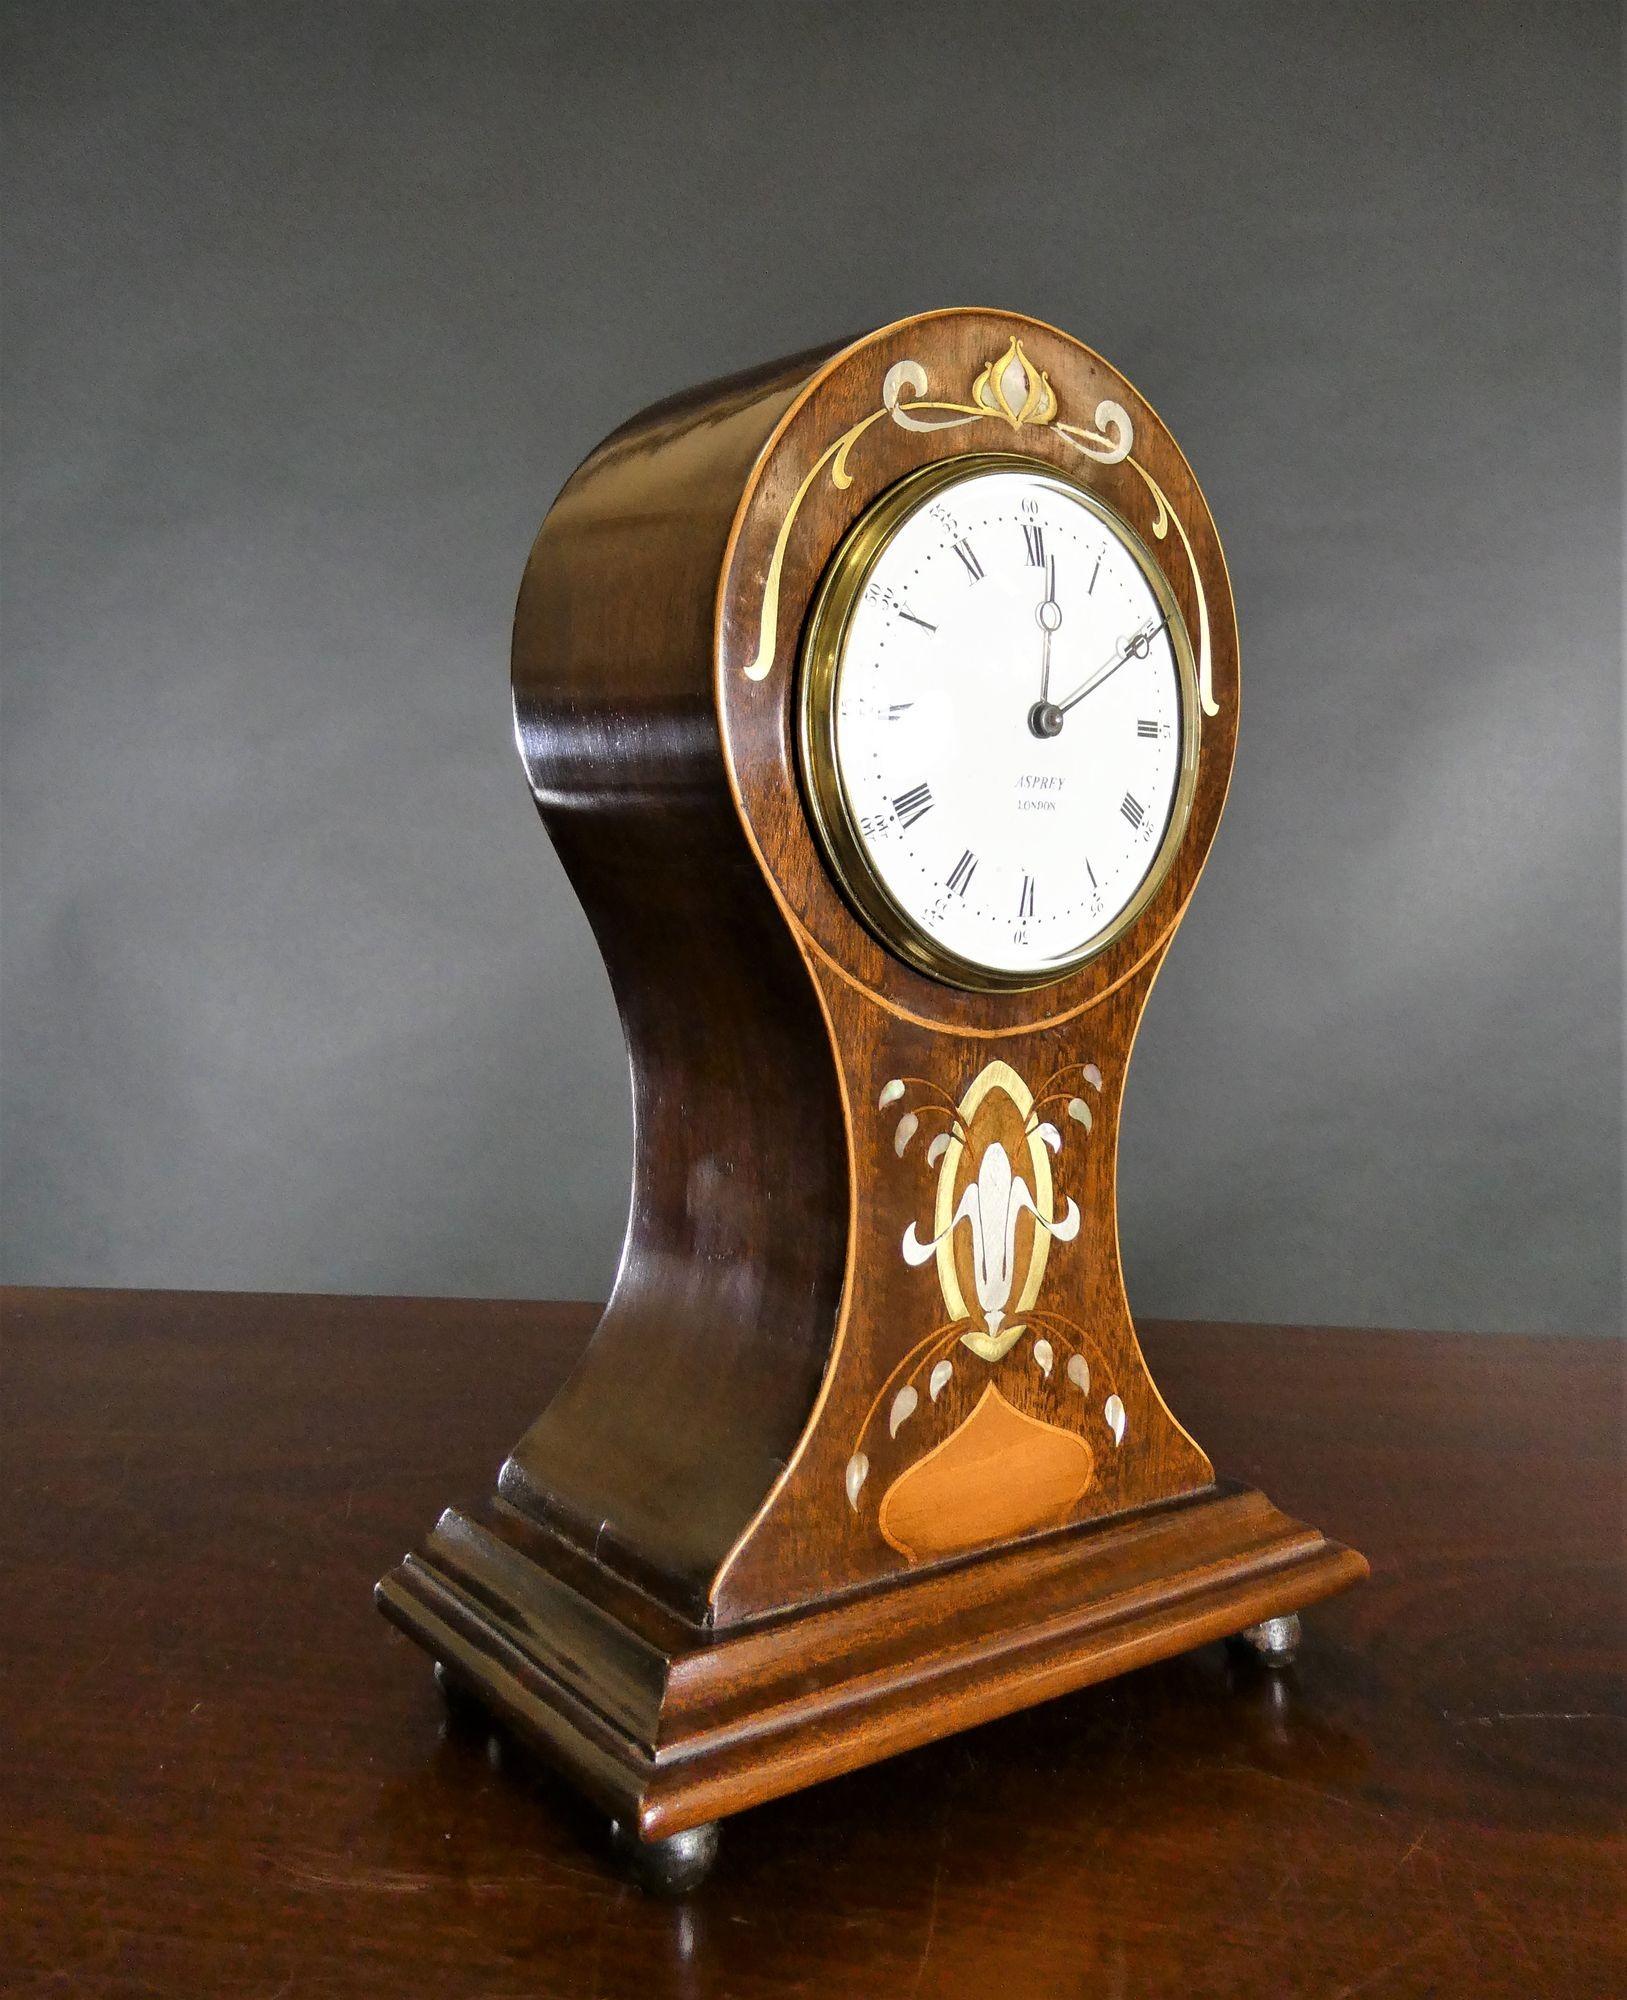 Edwardian Mahogany Balloon Mantel Clock, Asprey, London
 
Edwardian mantel clock housed in a balloon shaped mahogany case with satinwood line stringing and beautifully inlaid with mother of pearl, satinwood, brass and pewter with brass bezel and